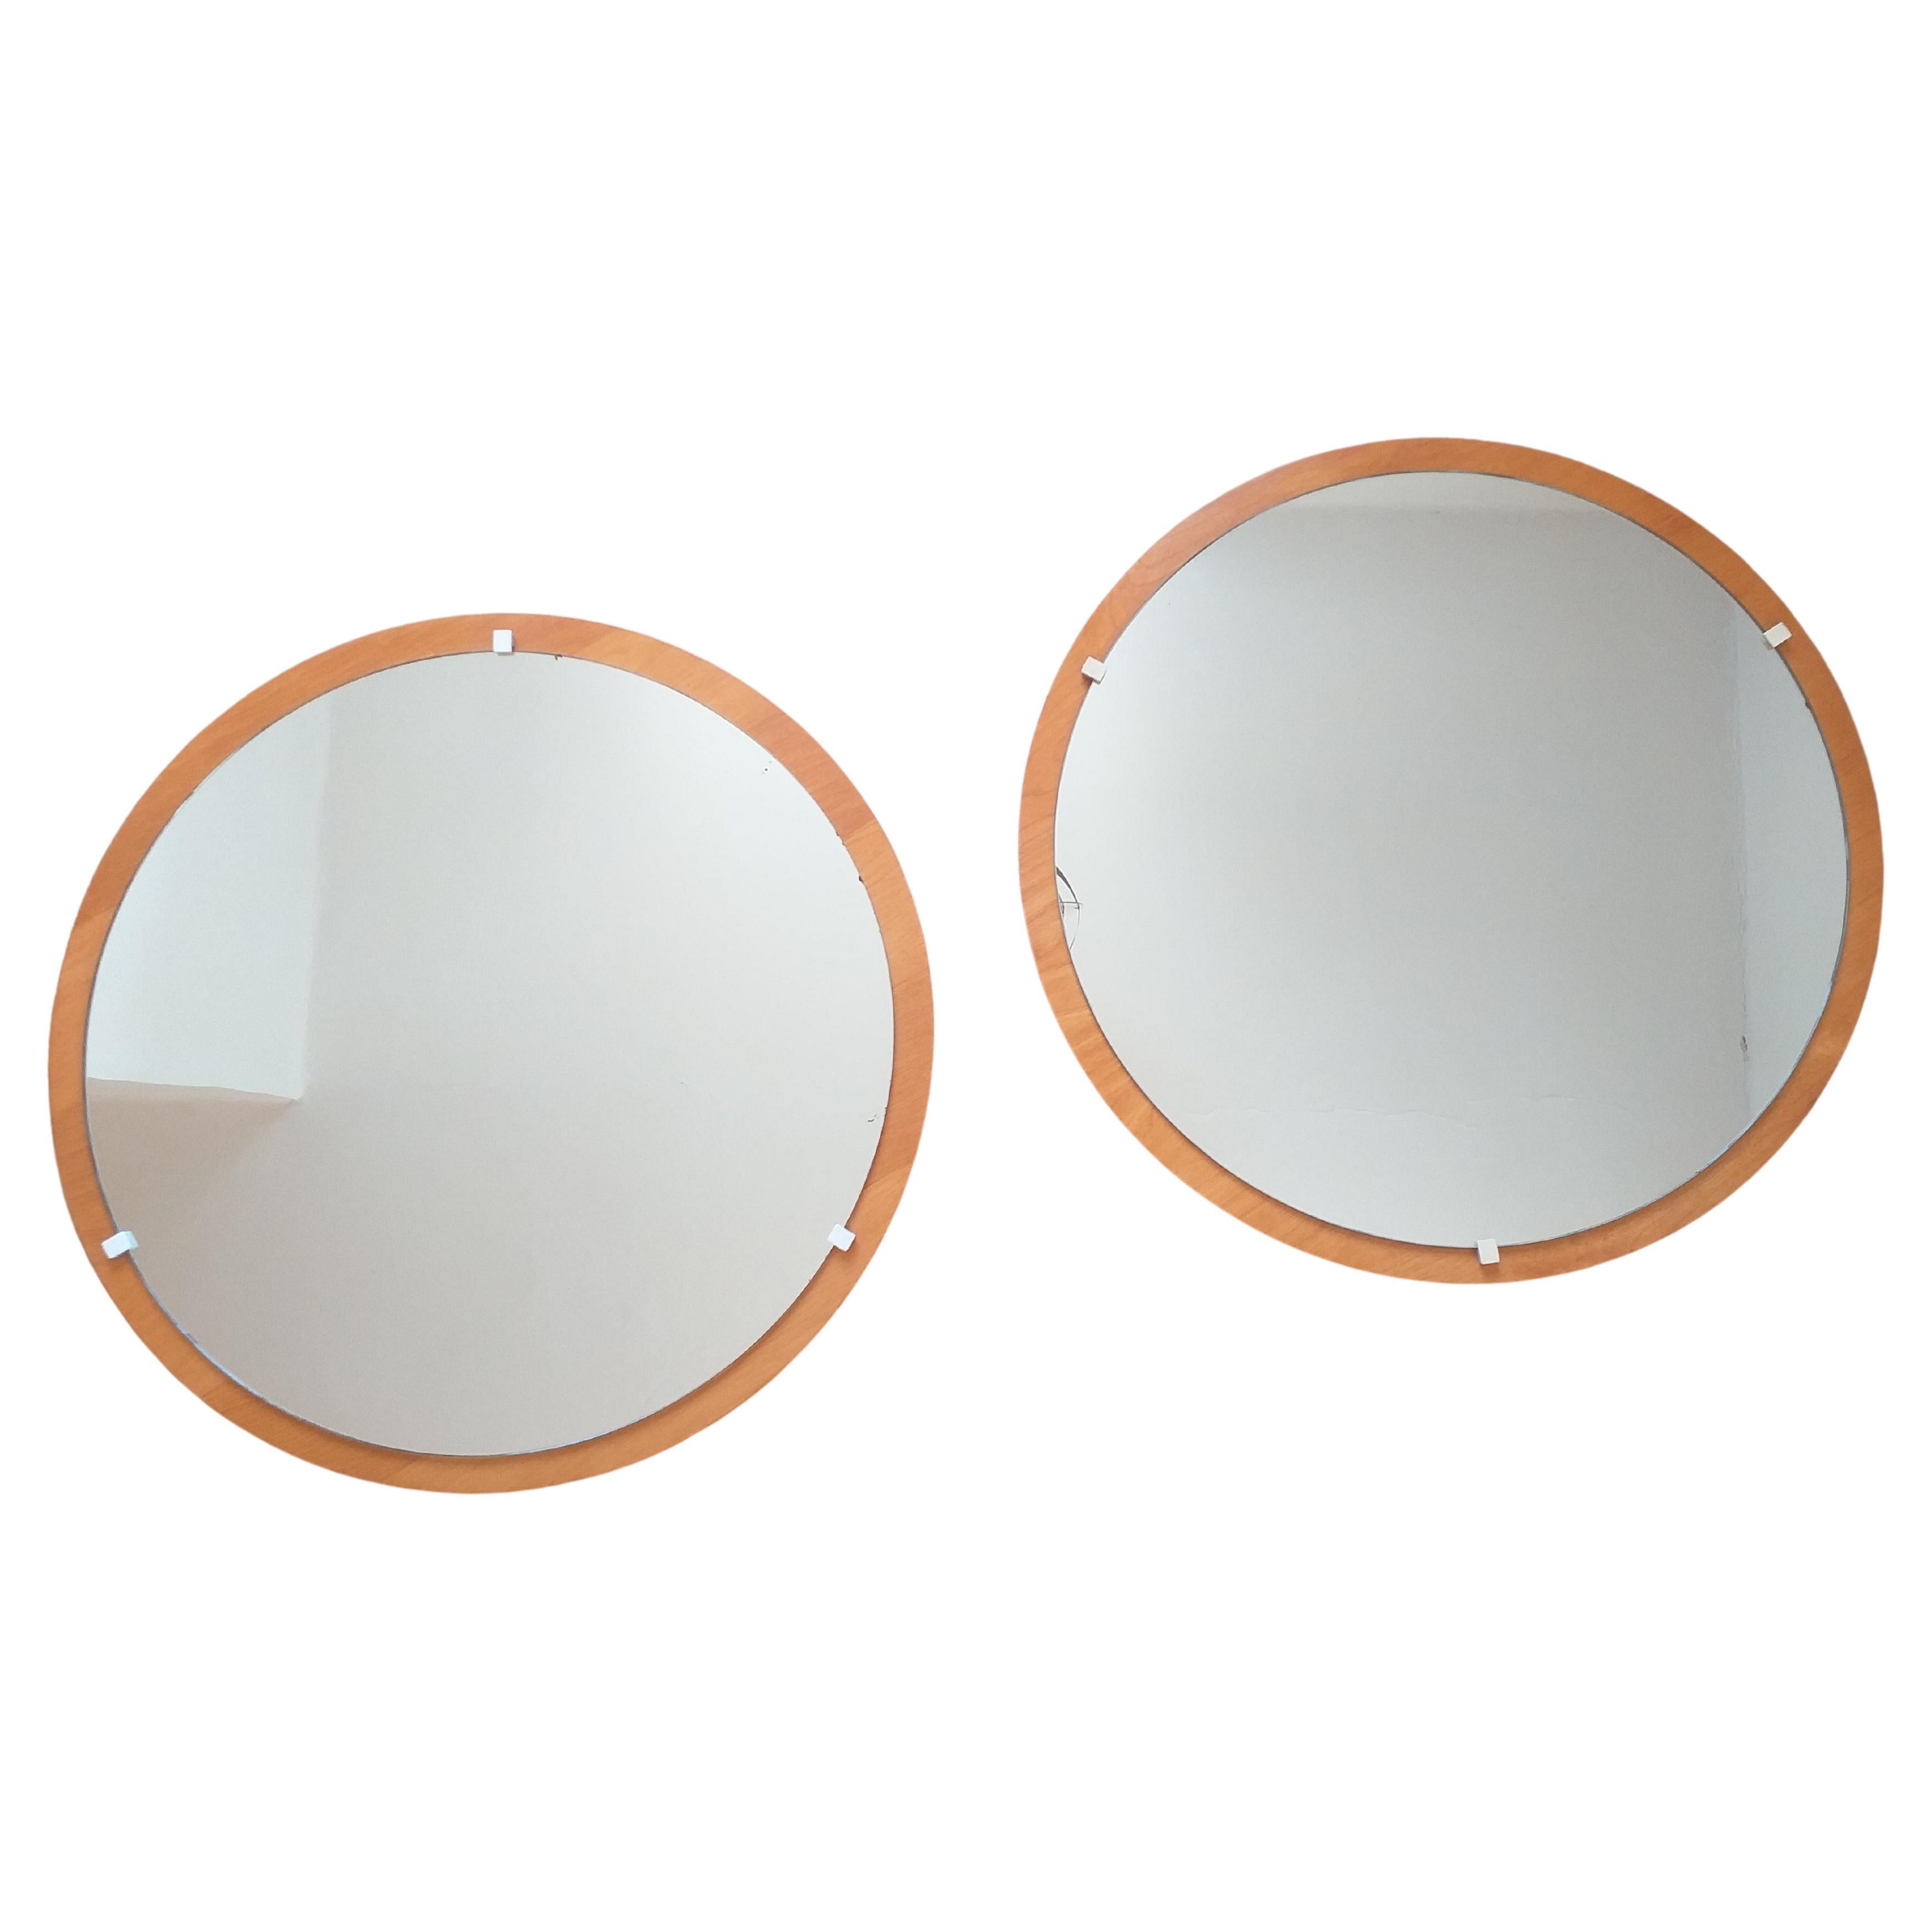 Set of Two Midcentury Teak Wall Mirrors, Denmark, 1960s For Sale